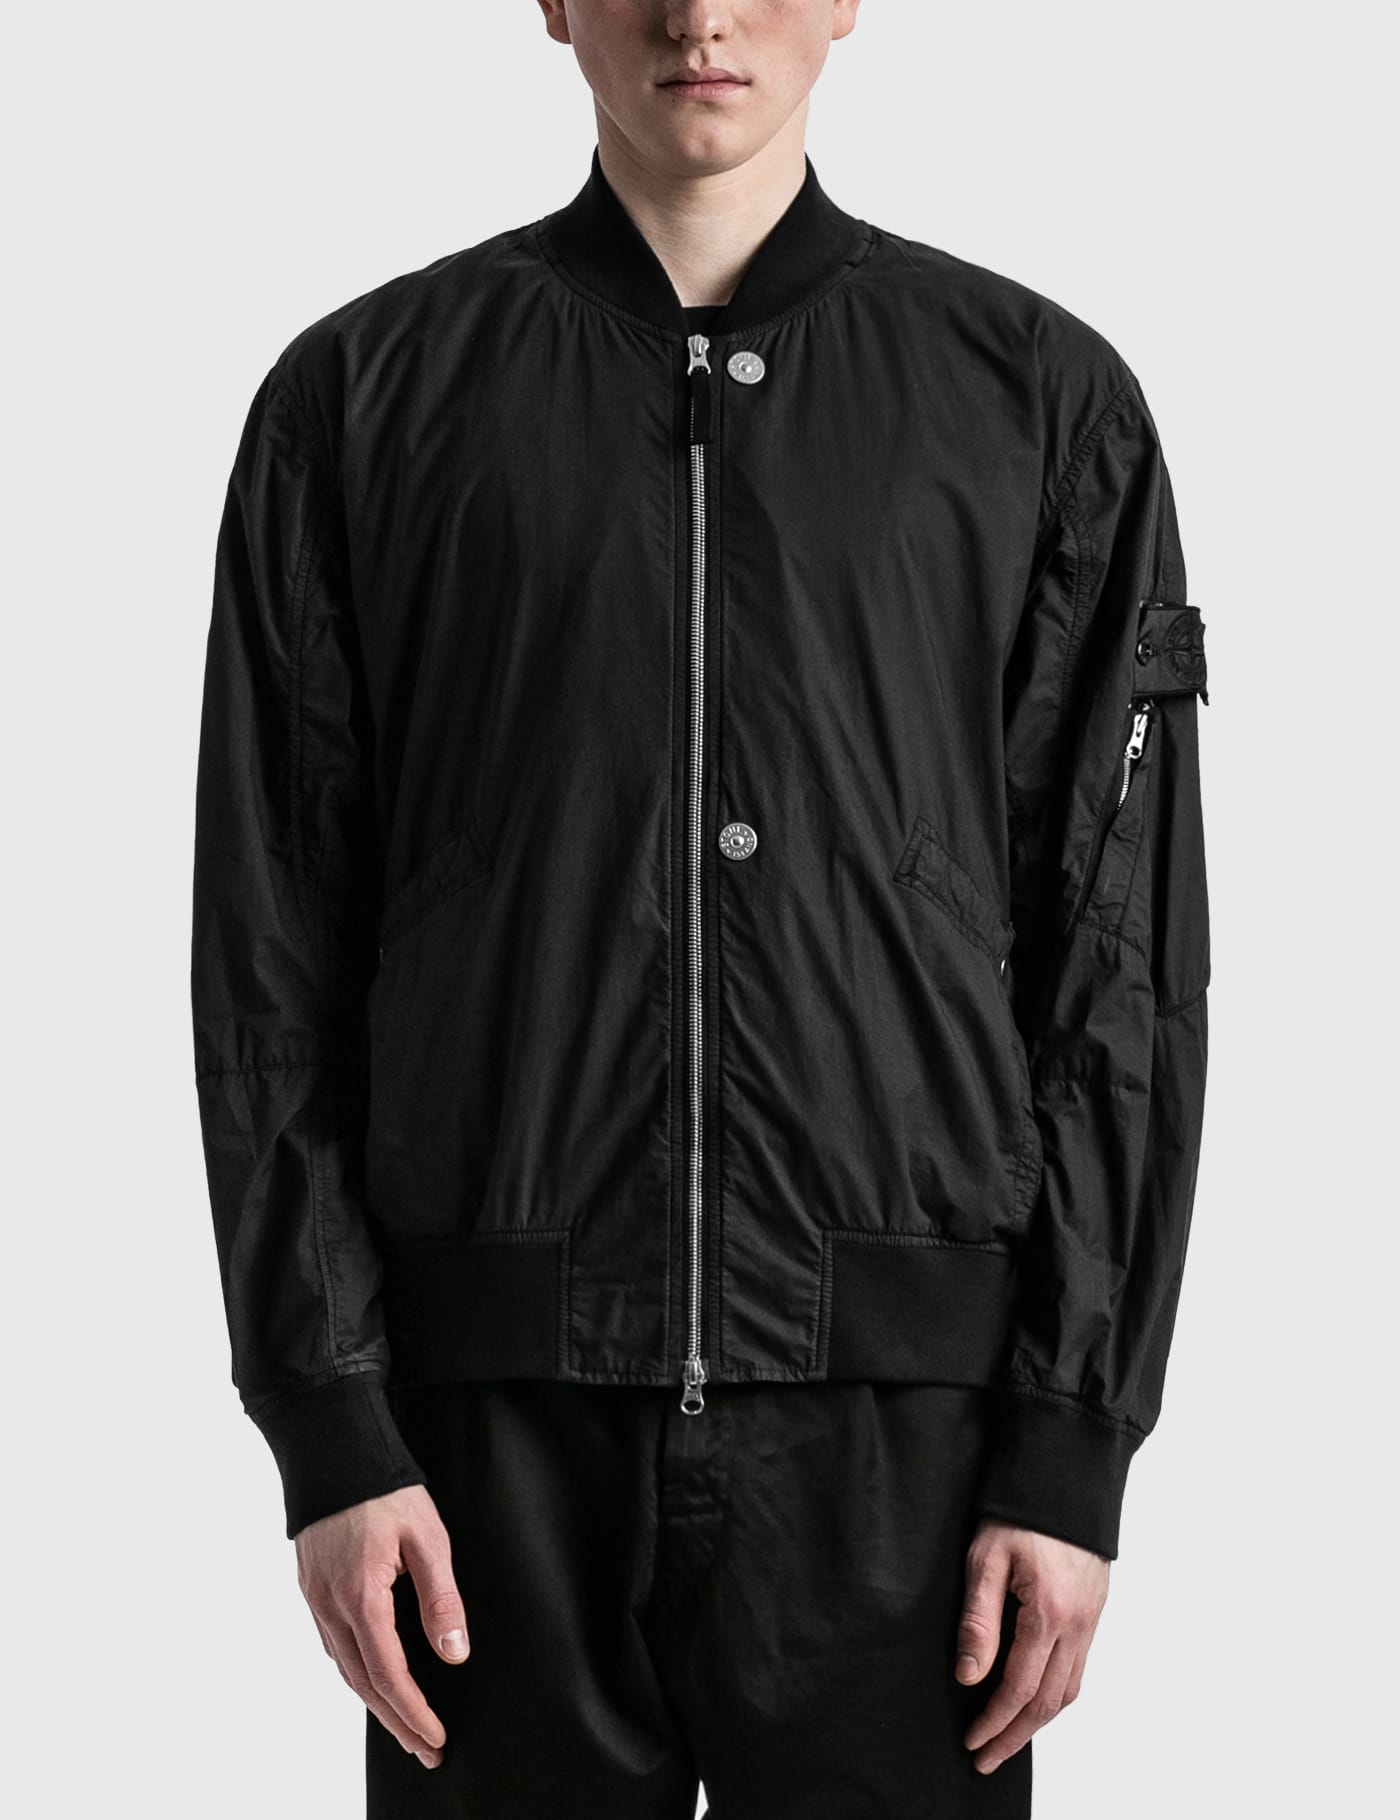 Stone Island Shadow Project - HD Pelleovo Cotton Bomber Jacket | HBX -  Globally Curated Fashion and Lifestyle by Hypebeast